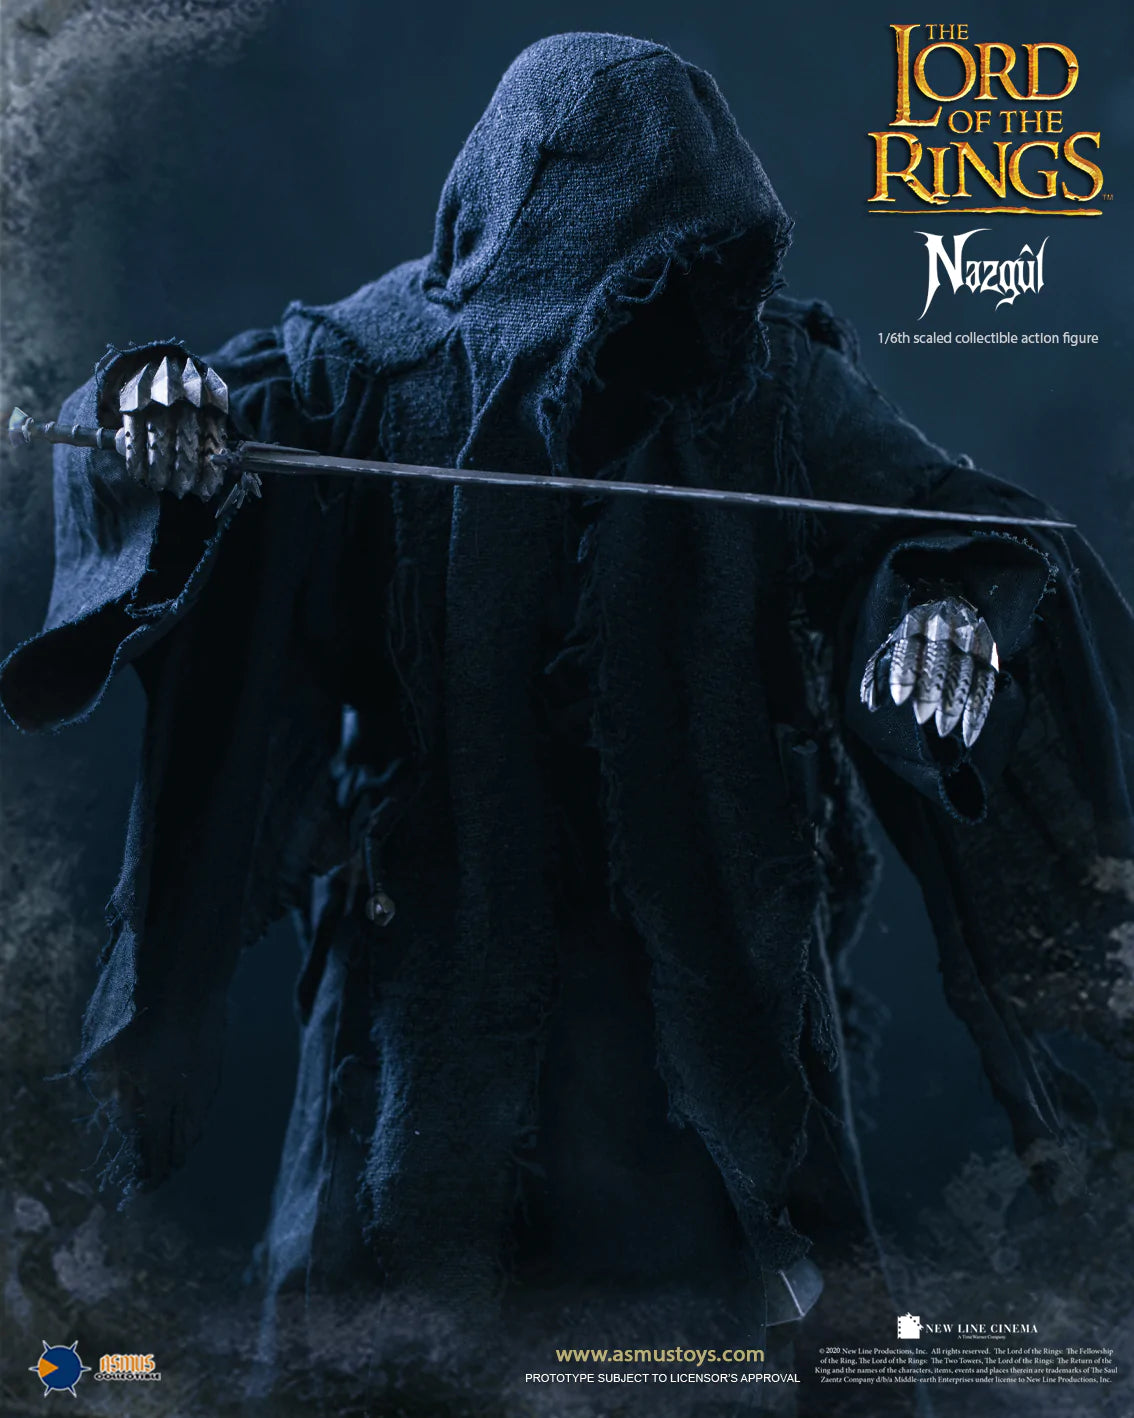 ASMUS TOYS THE LORD OF THE RINGS SERIES Nazgul